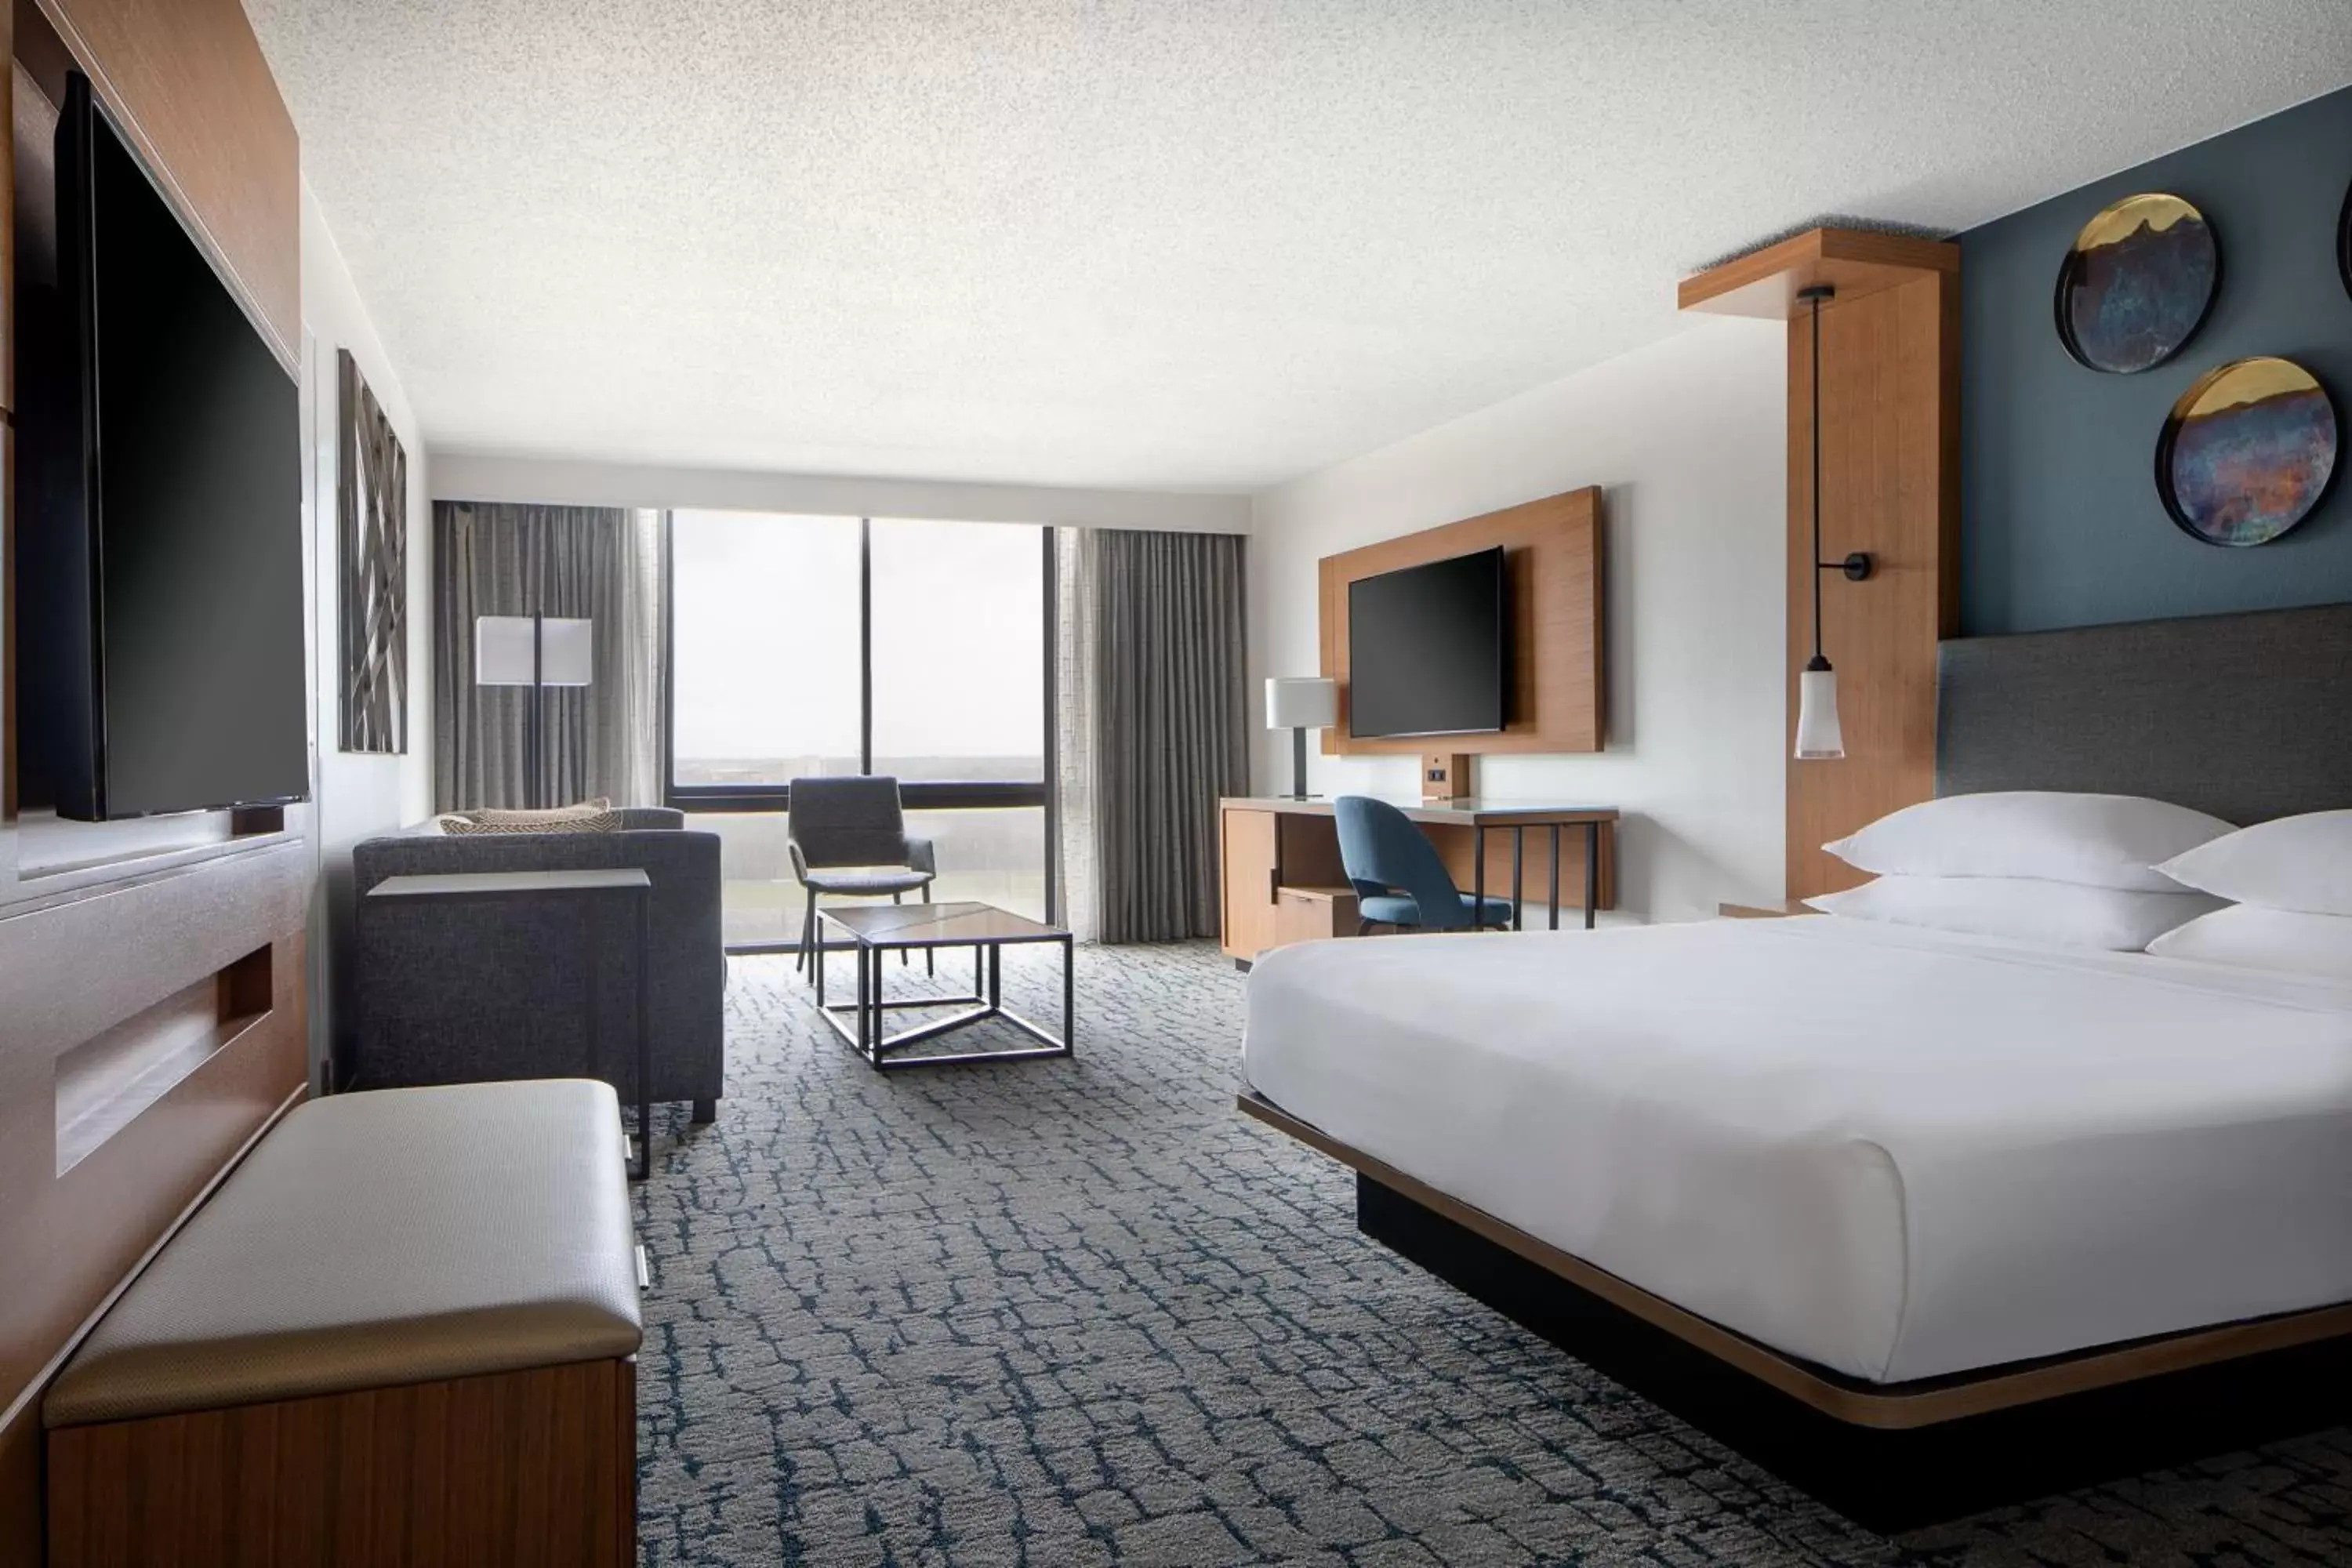 Bedroom in Houston Marriott South at Hobby Airport